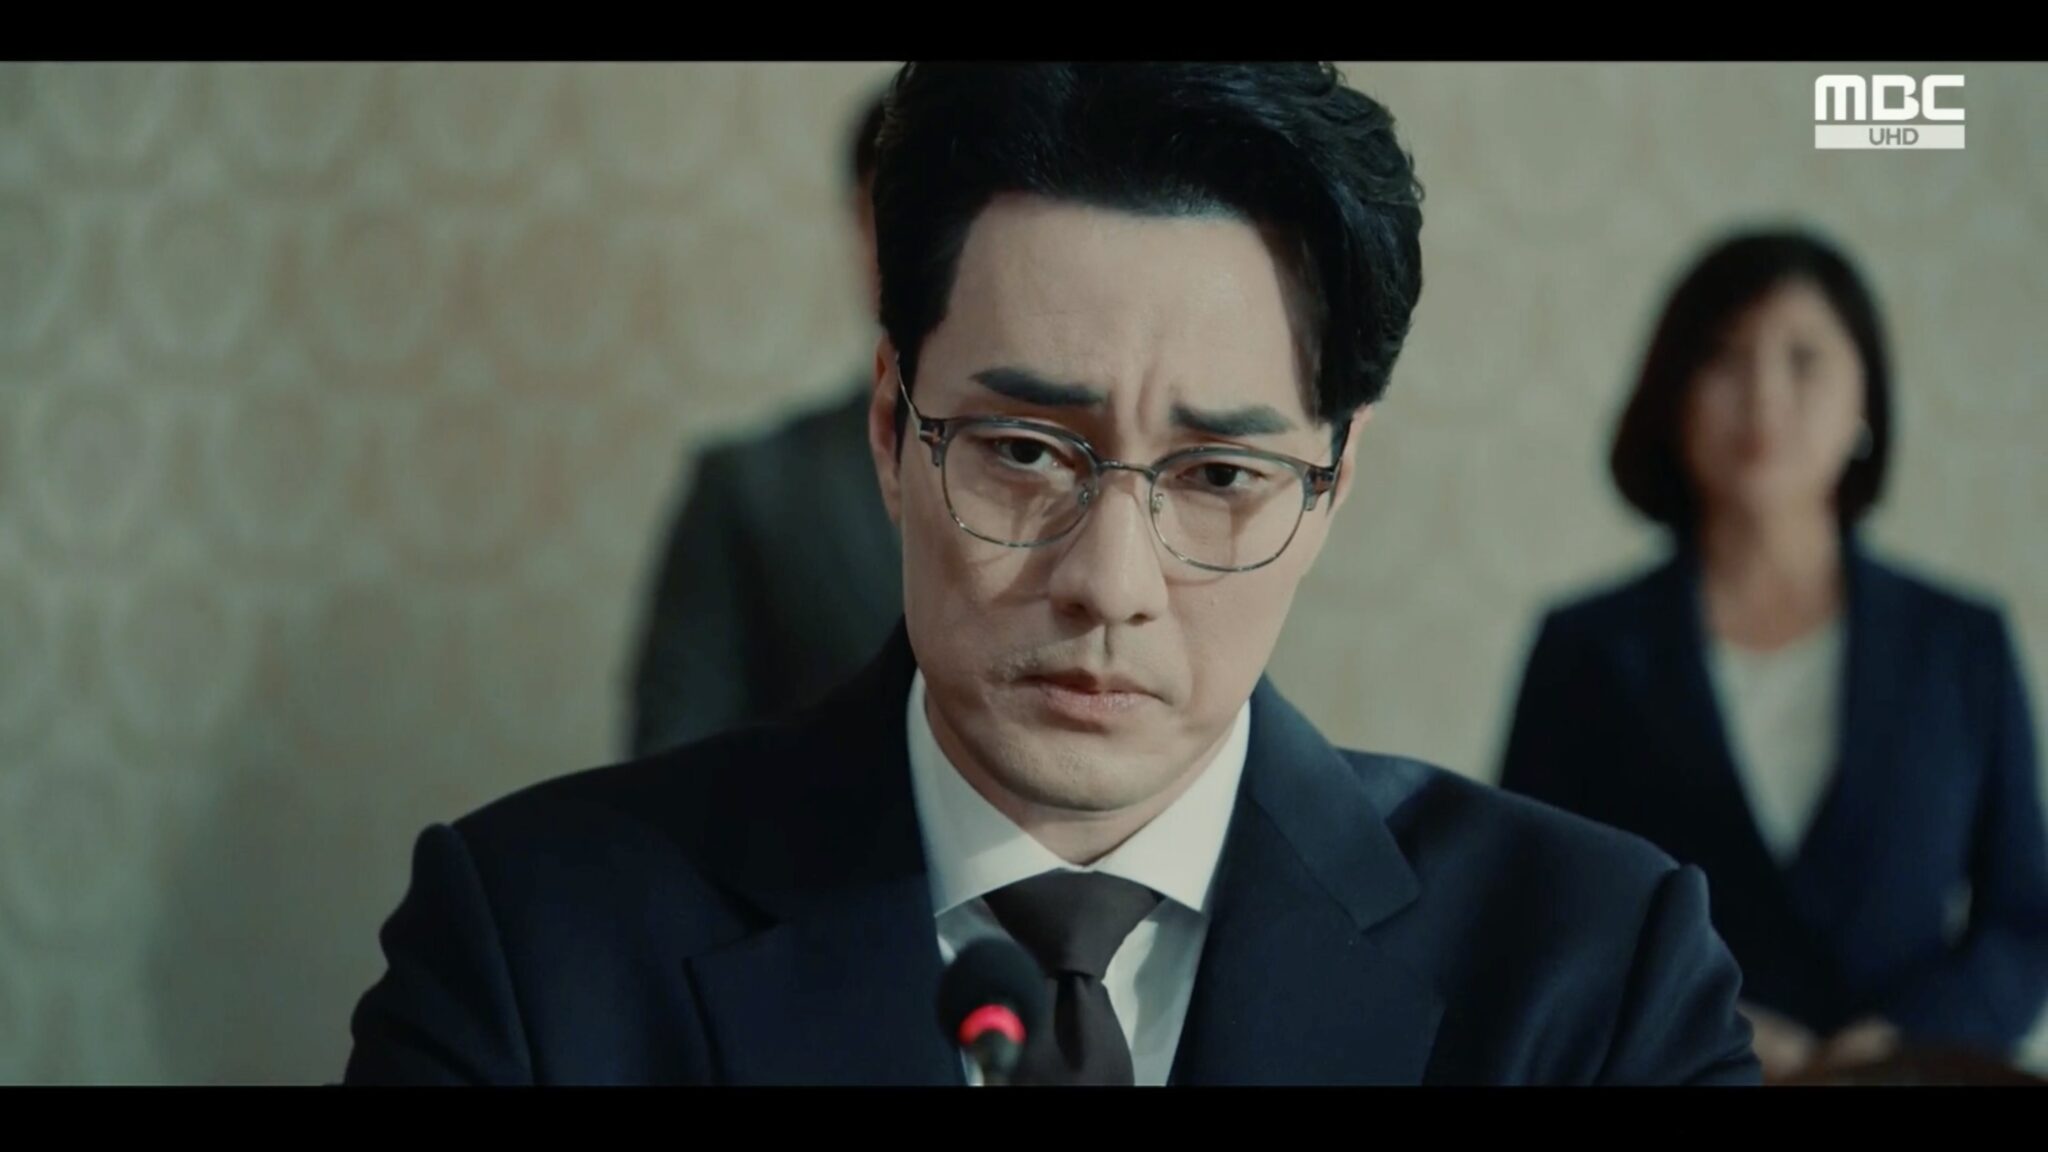 Doctor Lawyer Episodes 13-14